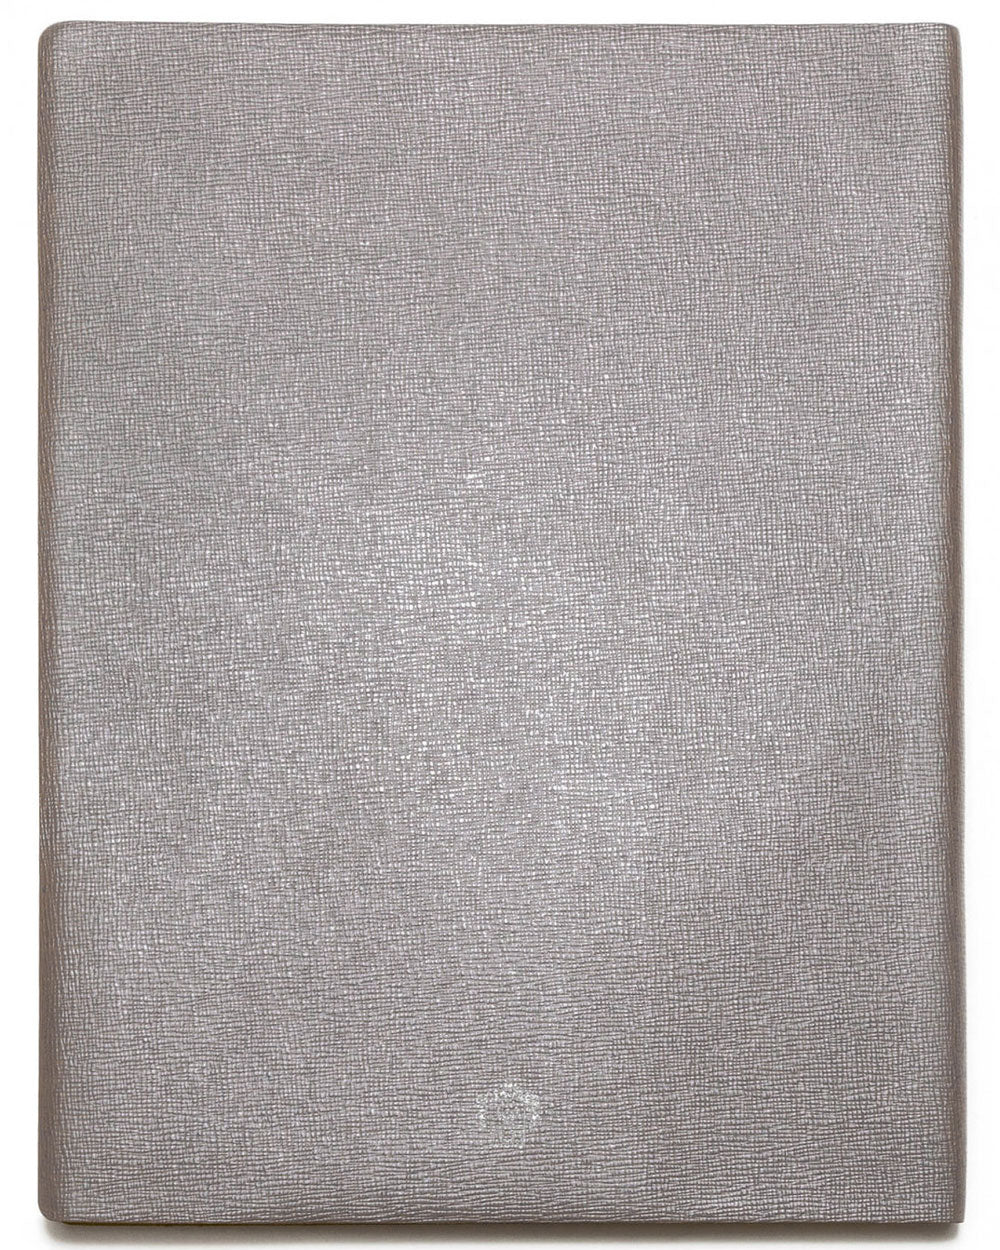 Small Milano Leather Notebook in Silver